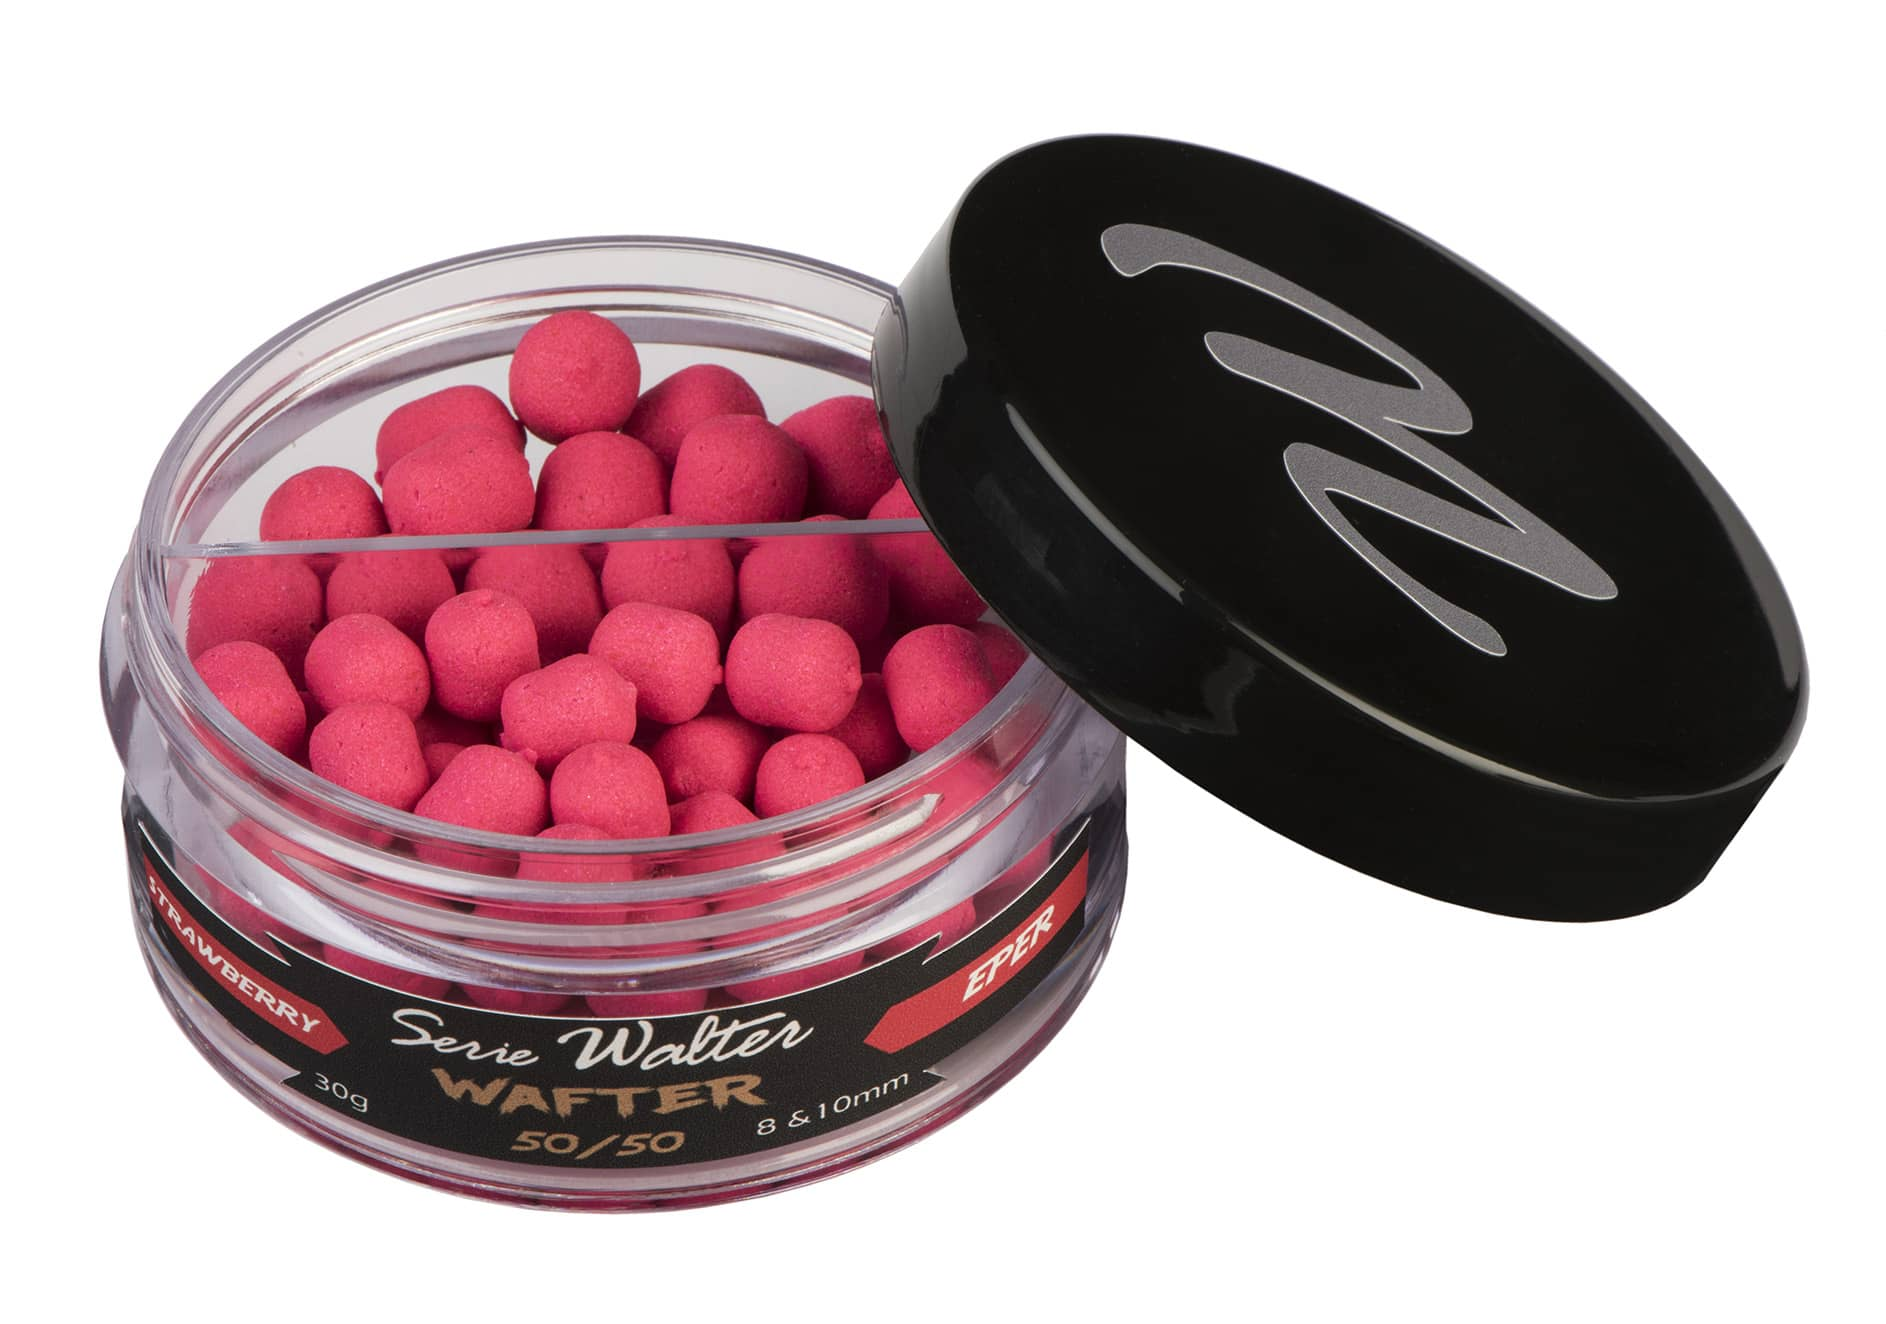 SERIE WALTER WAFTER 8-10MM STRAWBERRY